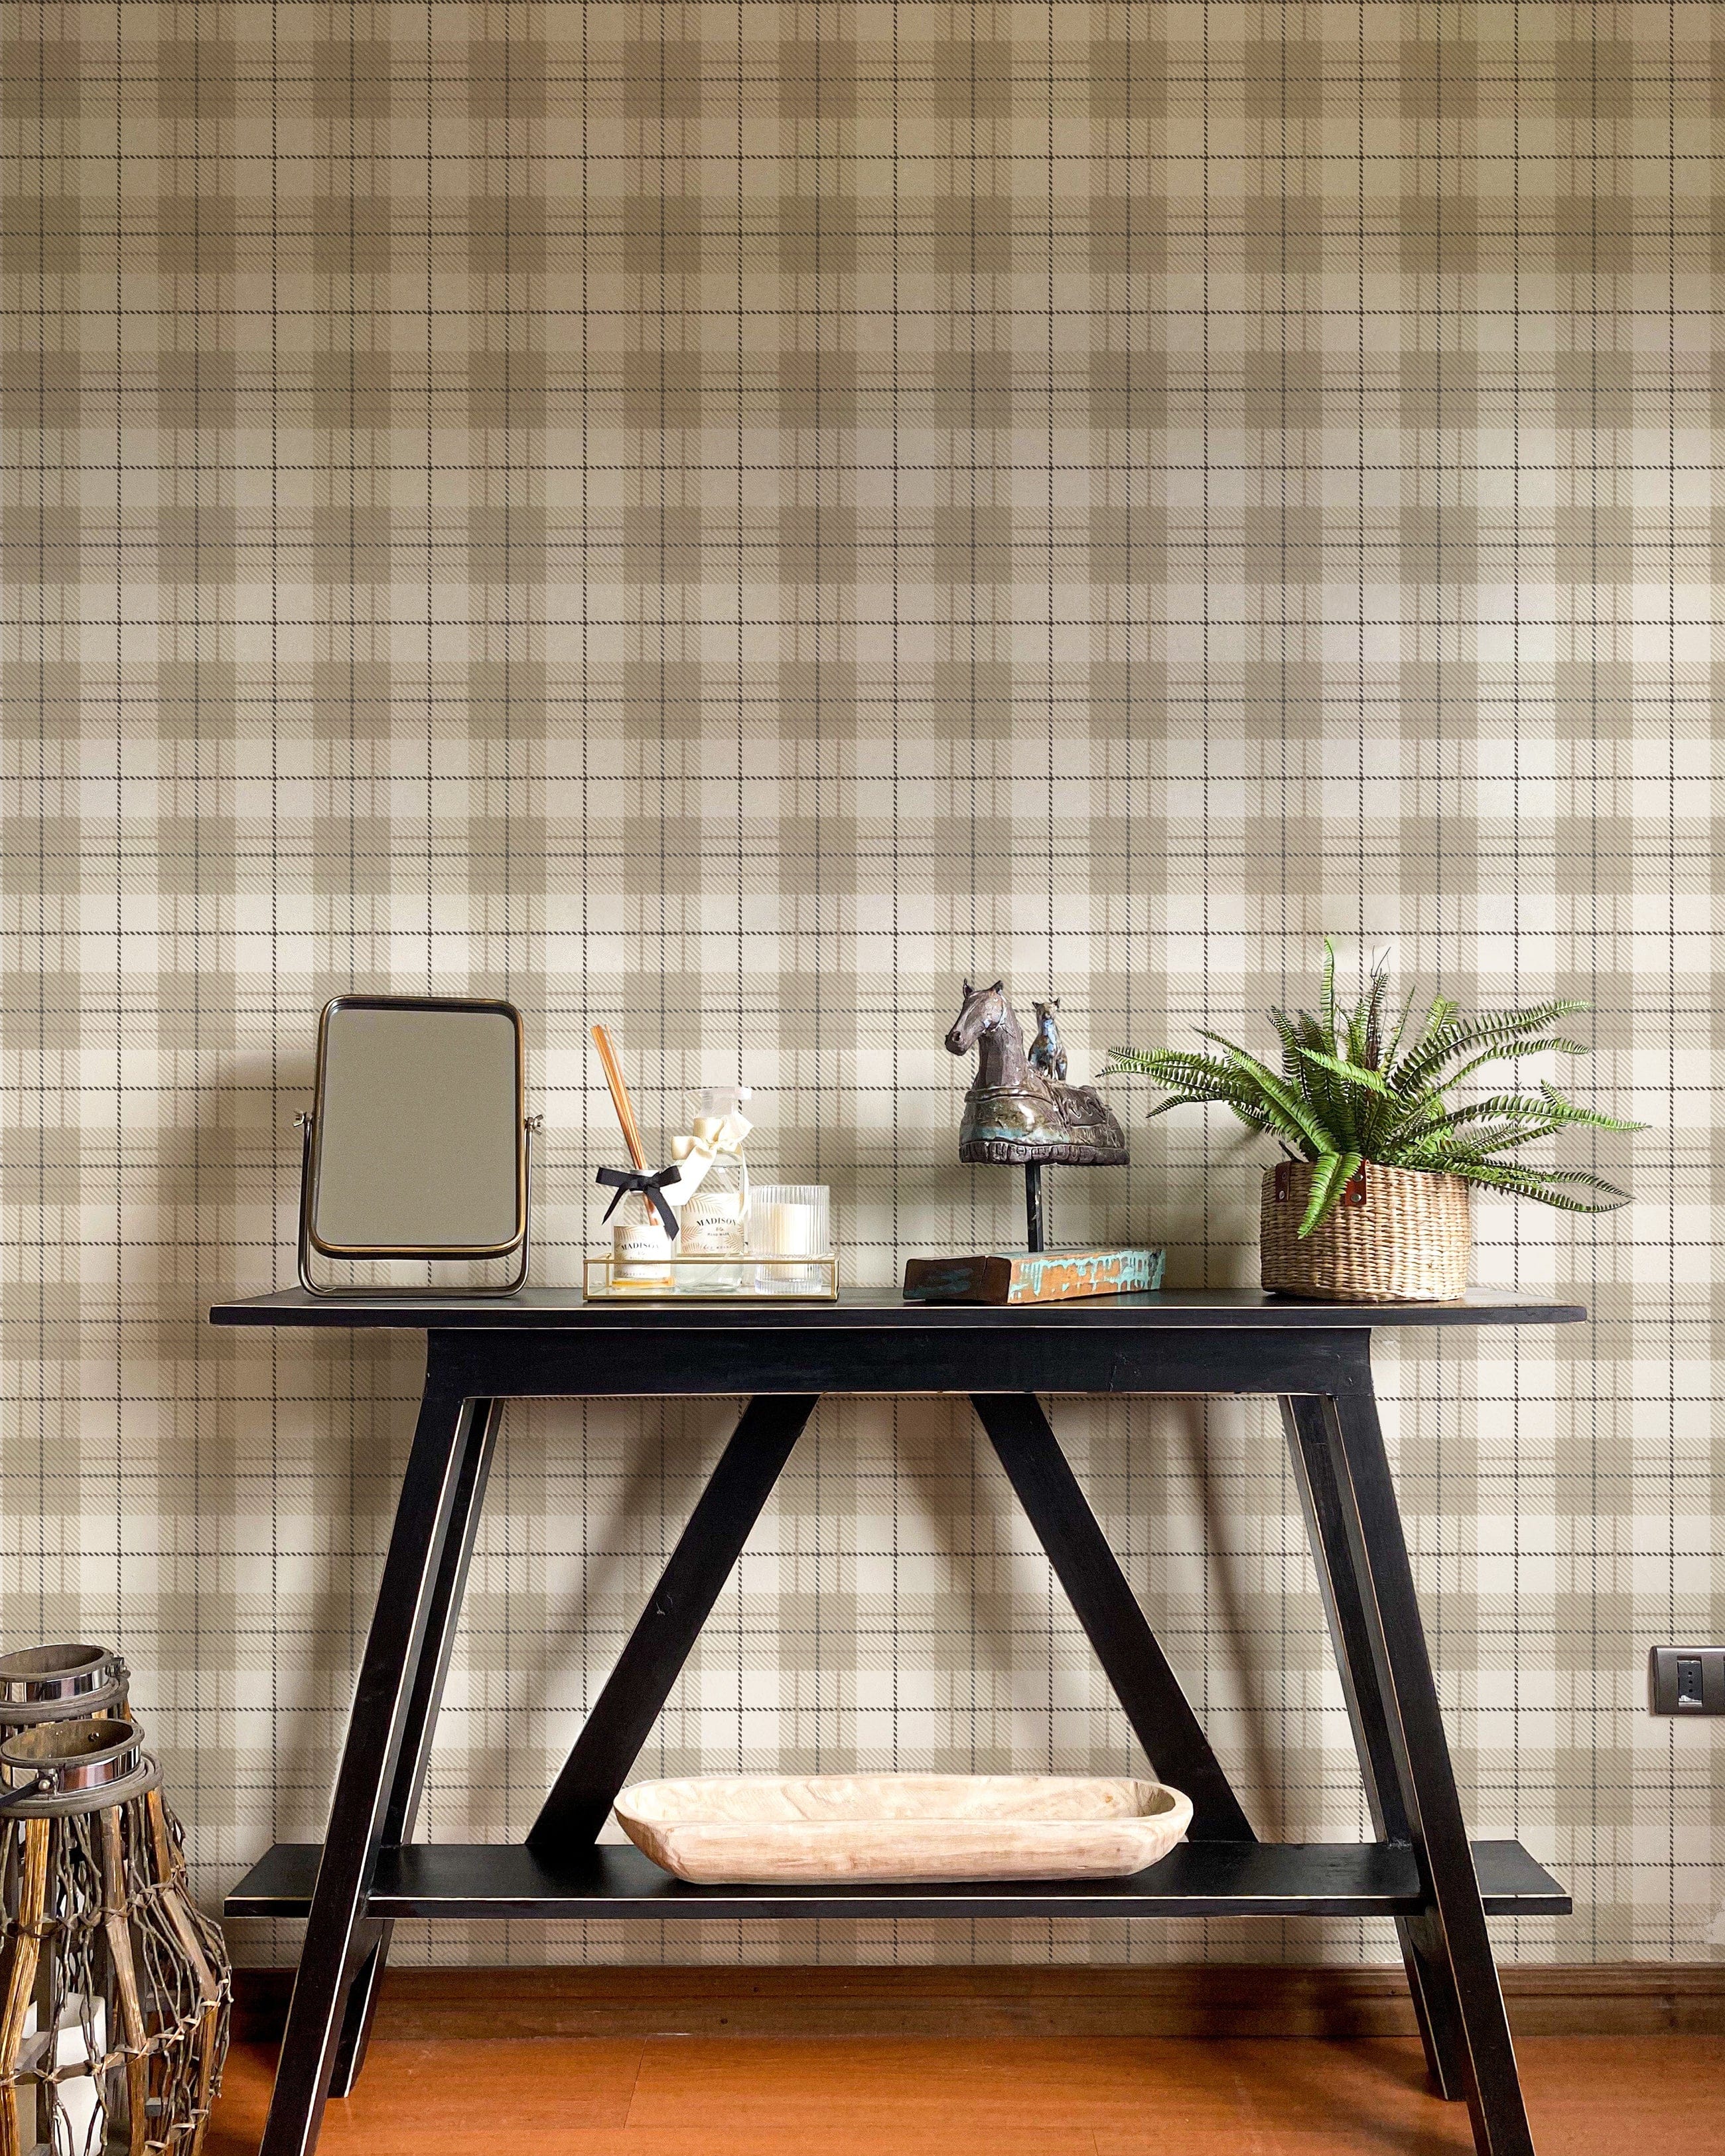 A chic home office area showcasing Winter Plaid Wallpaper as the backdrop, with a dark, angular wooden desk adorned with home decor items, contrasting the wallpaper's timeless plaid design in soft, warm tones, creating a sophisticated and inviting workspace.